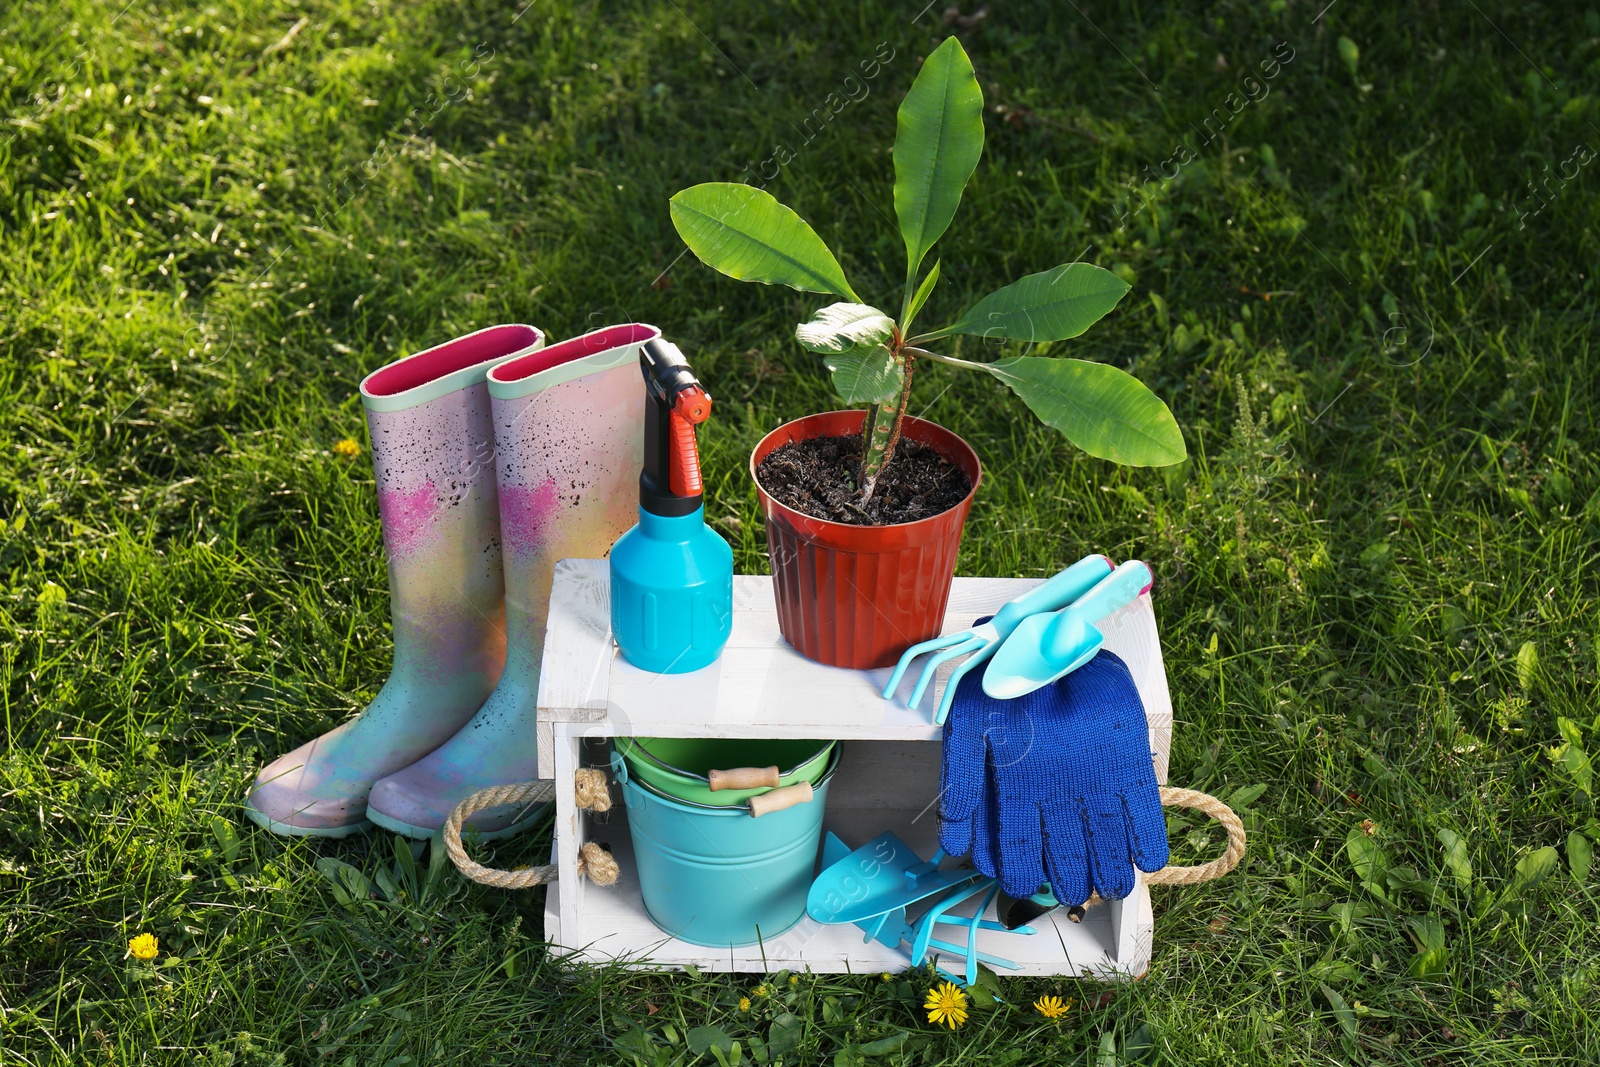 Photo of Pair of gloves, gardening tools, potted plant and rubber boots on grass outdoors